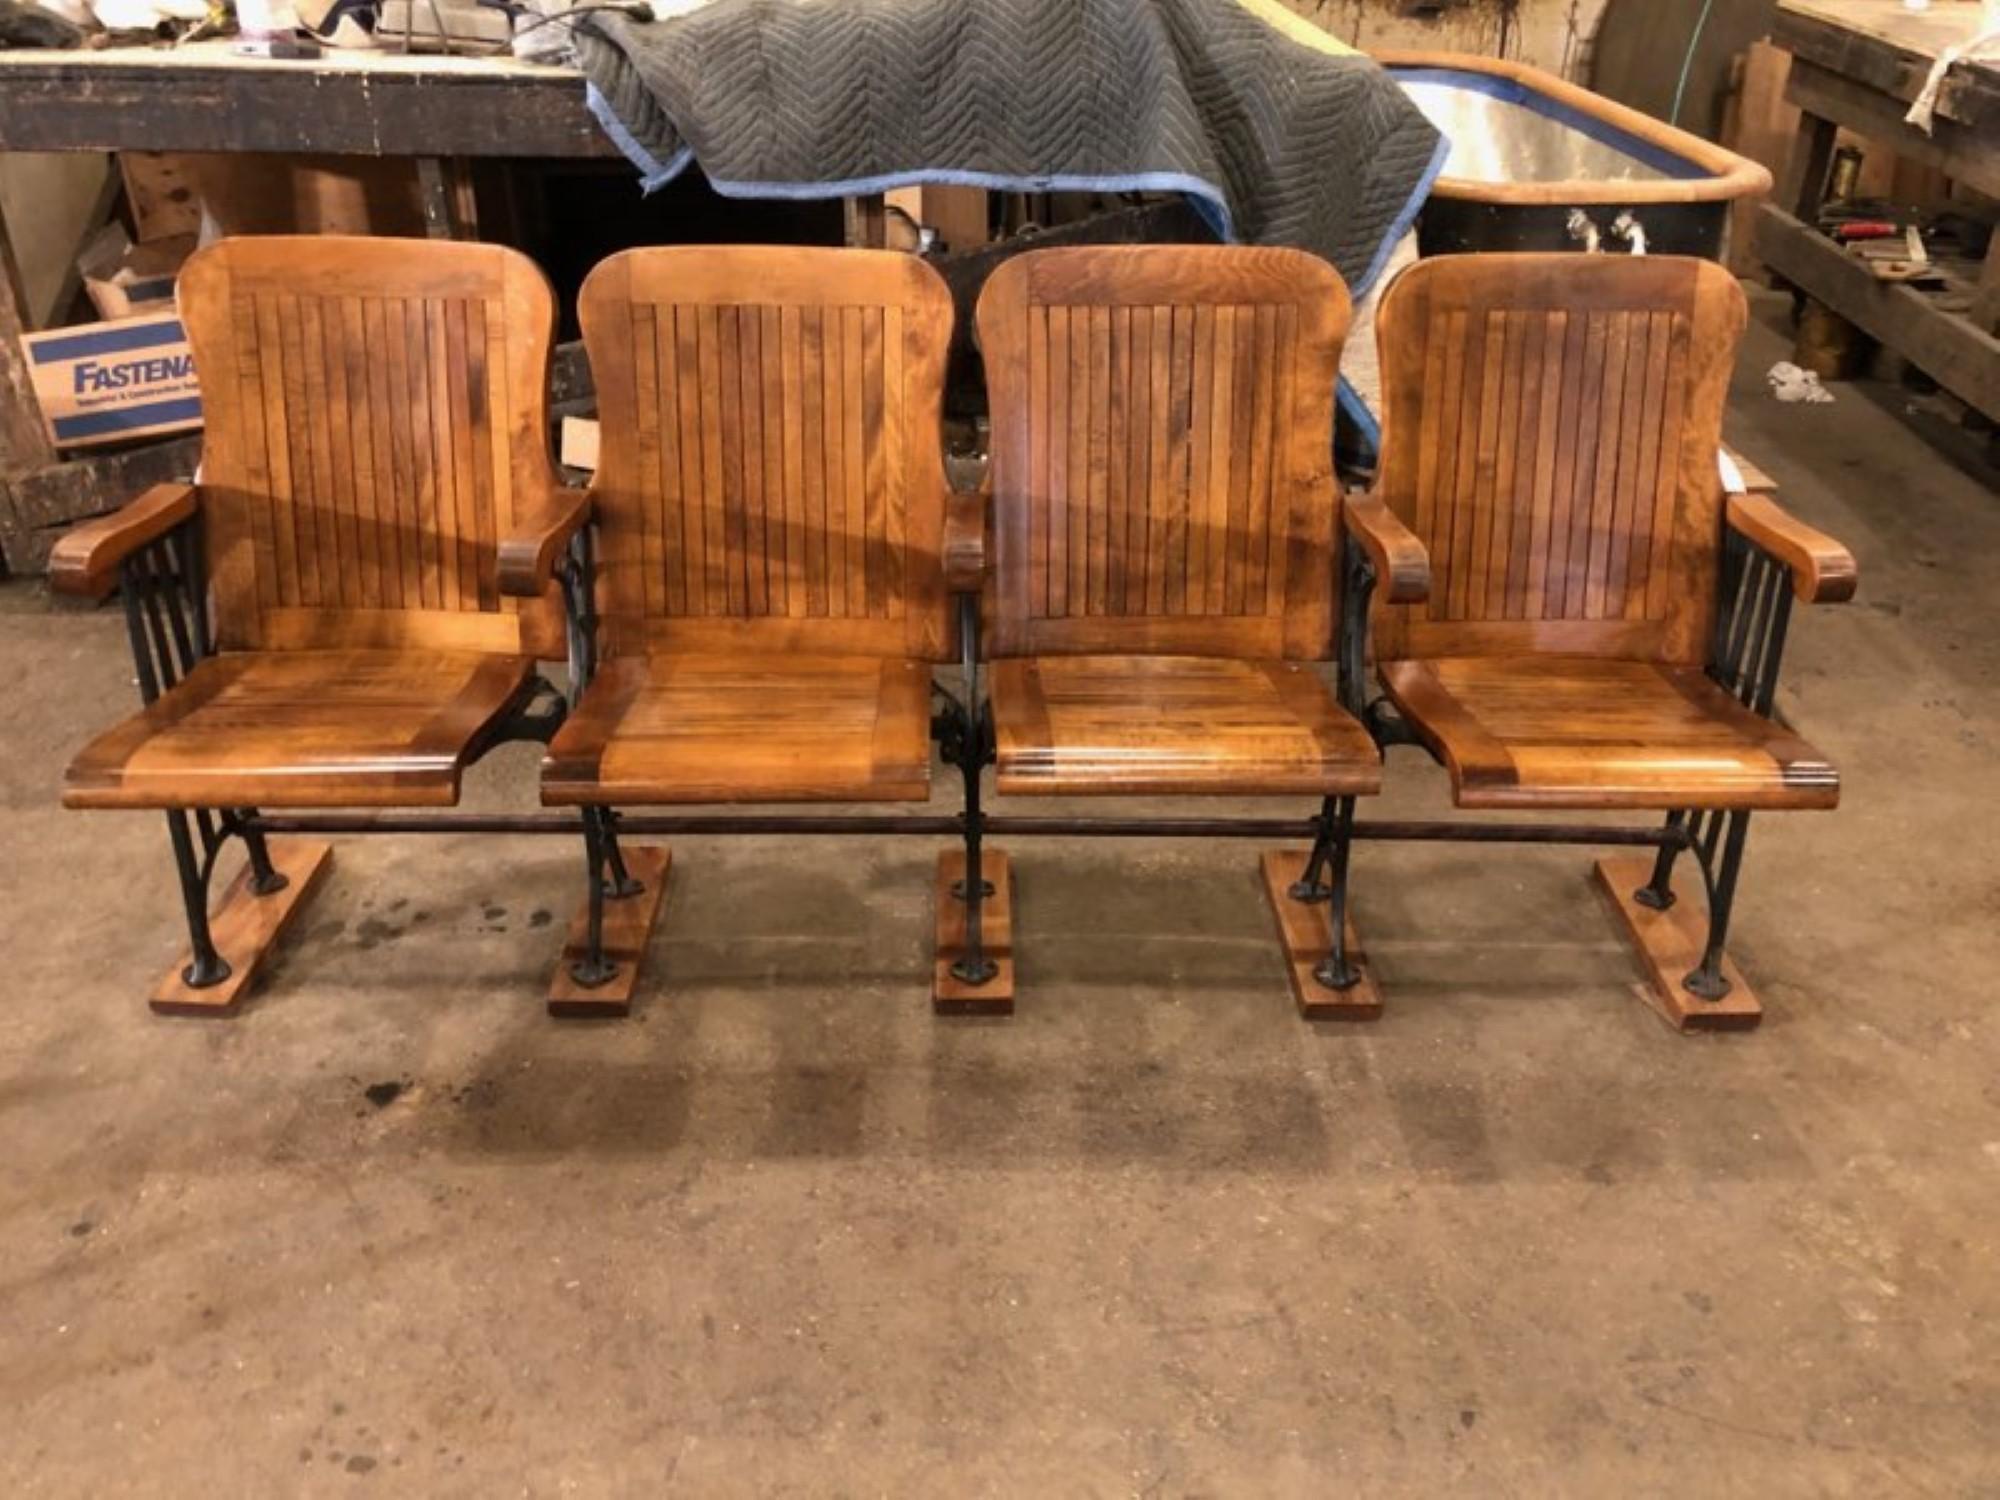 1905 Four Seat Folding Theater Chairs with Cast Iron Frame from Brooklyn 3